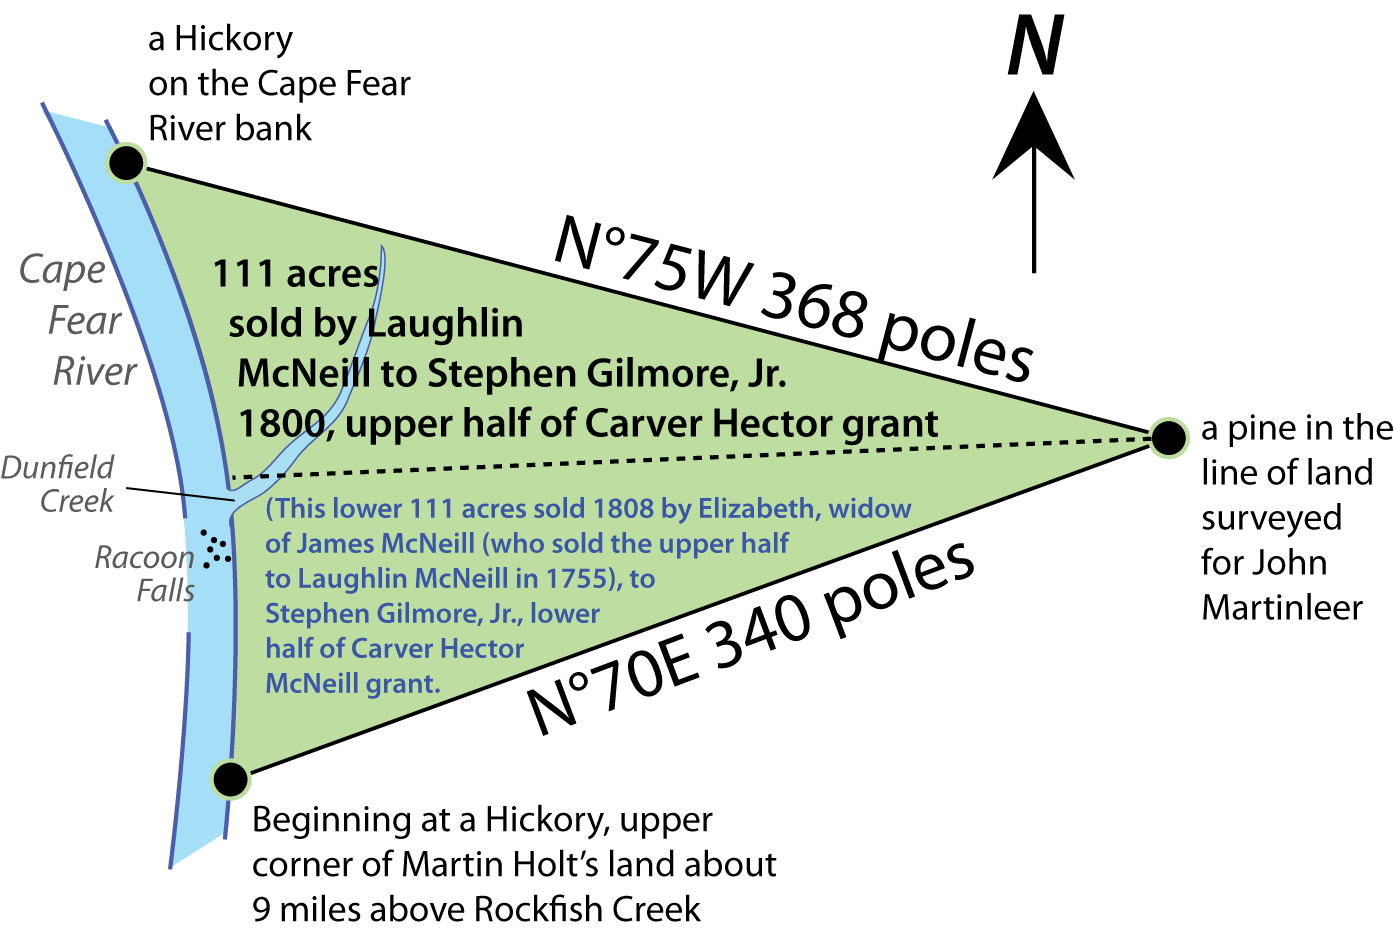 plat of 111 acres sold by Laughlin McNeill to Glimore, dated 1800, half of Carve Hector's 1740 grant